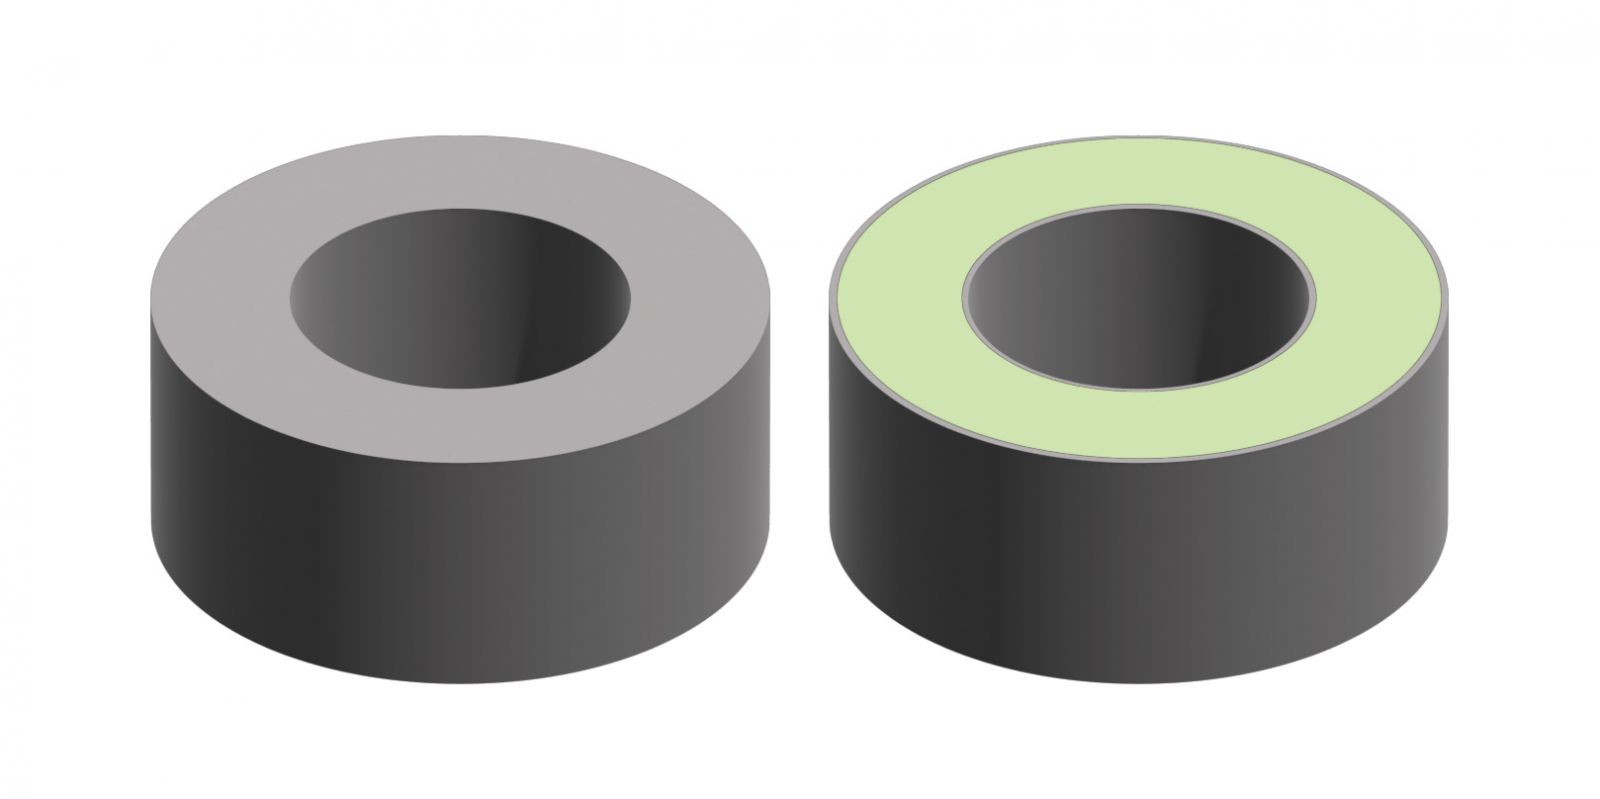 28 material-GOTREND Article-What does the color of the inductor ring mean? High conductivity ring